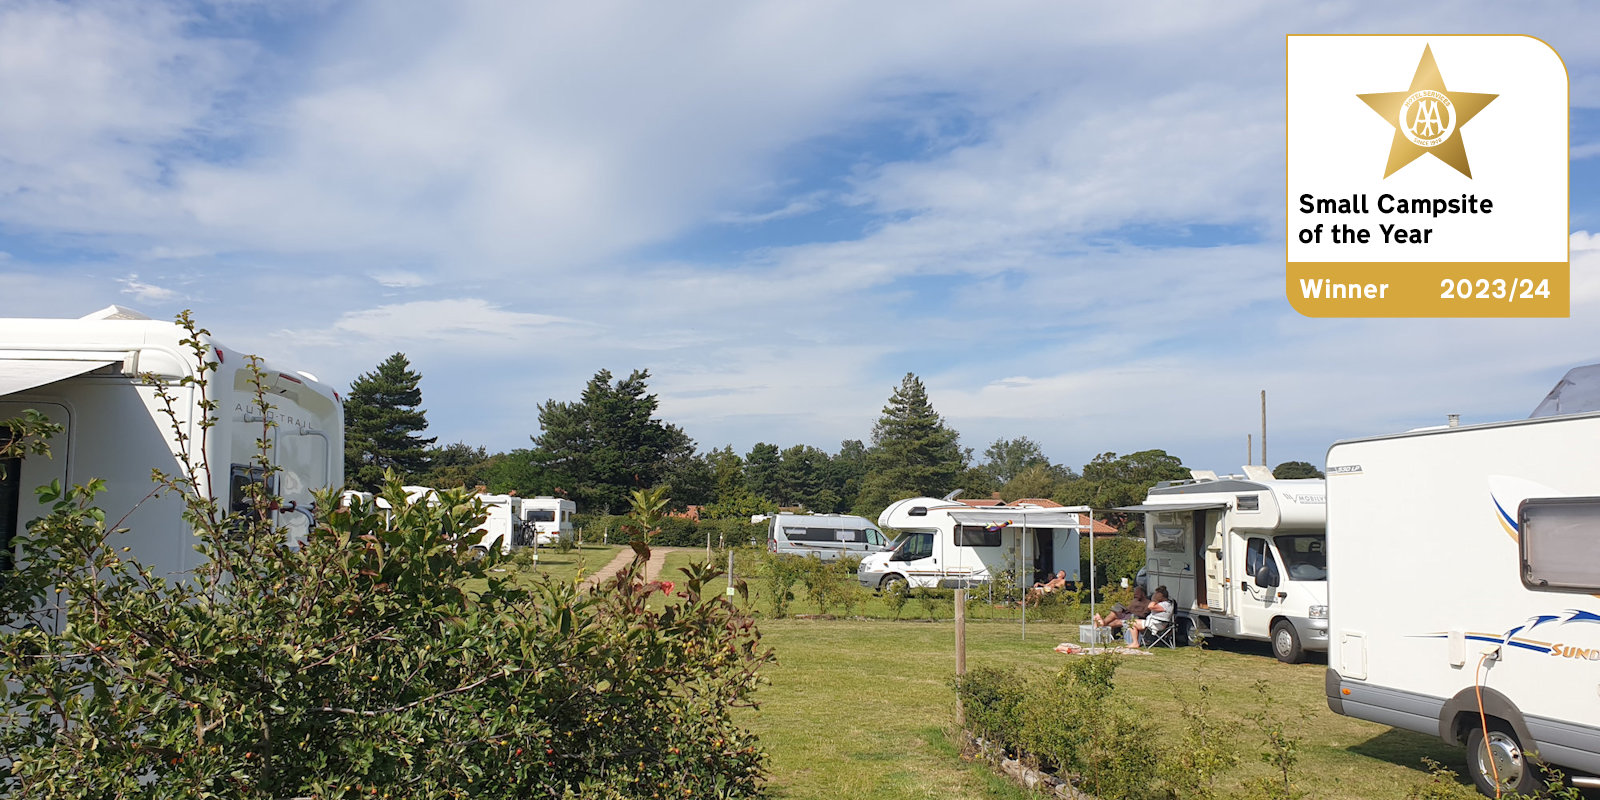 Deepdale Camping on the beautiful North Norfolk Coast